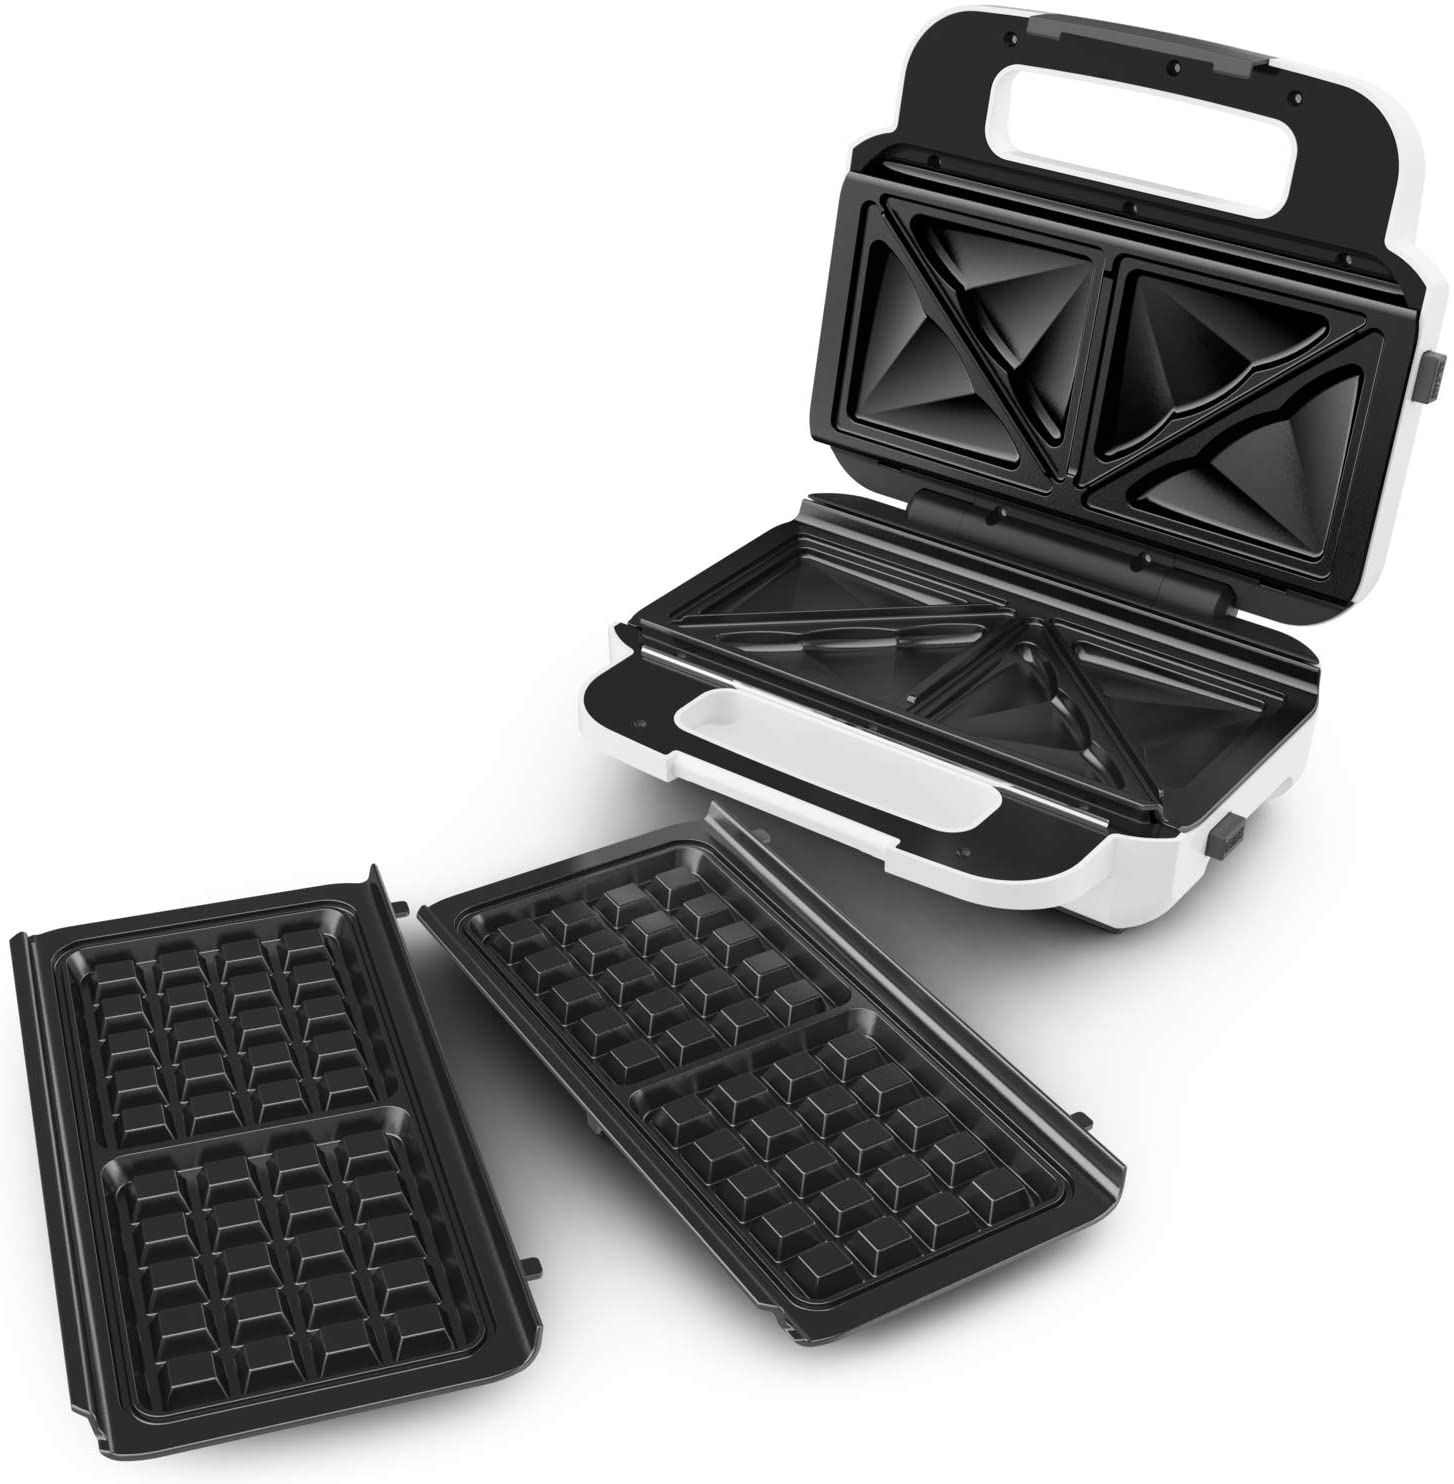 Tefal SW7011 Snack XL Sandwich Maker and Waffle Iron 2 Non-Stick Plate Sets